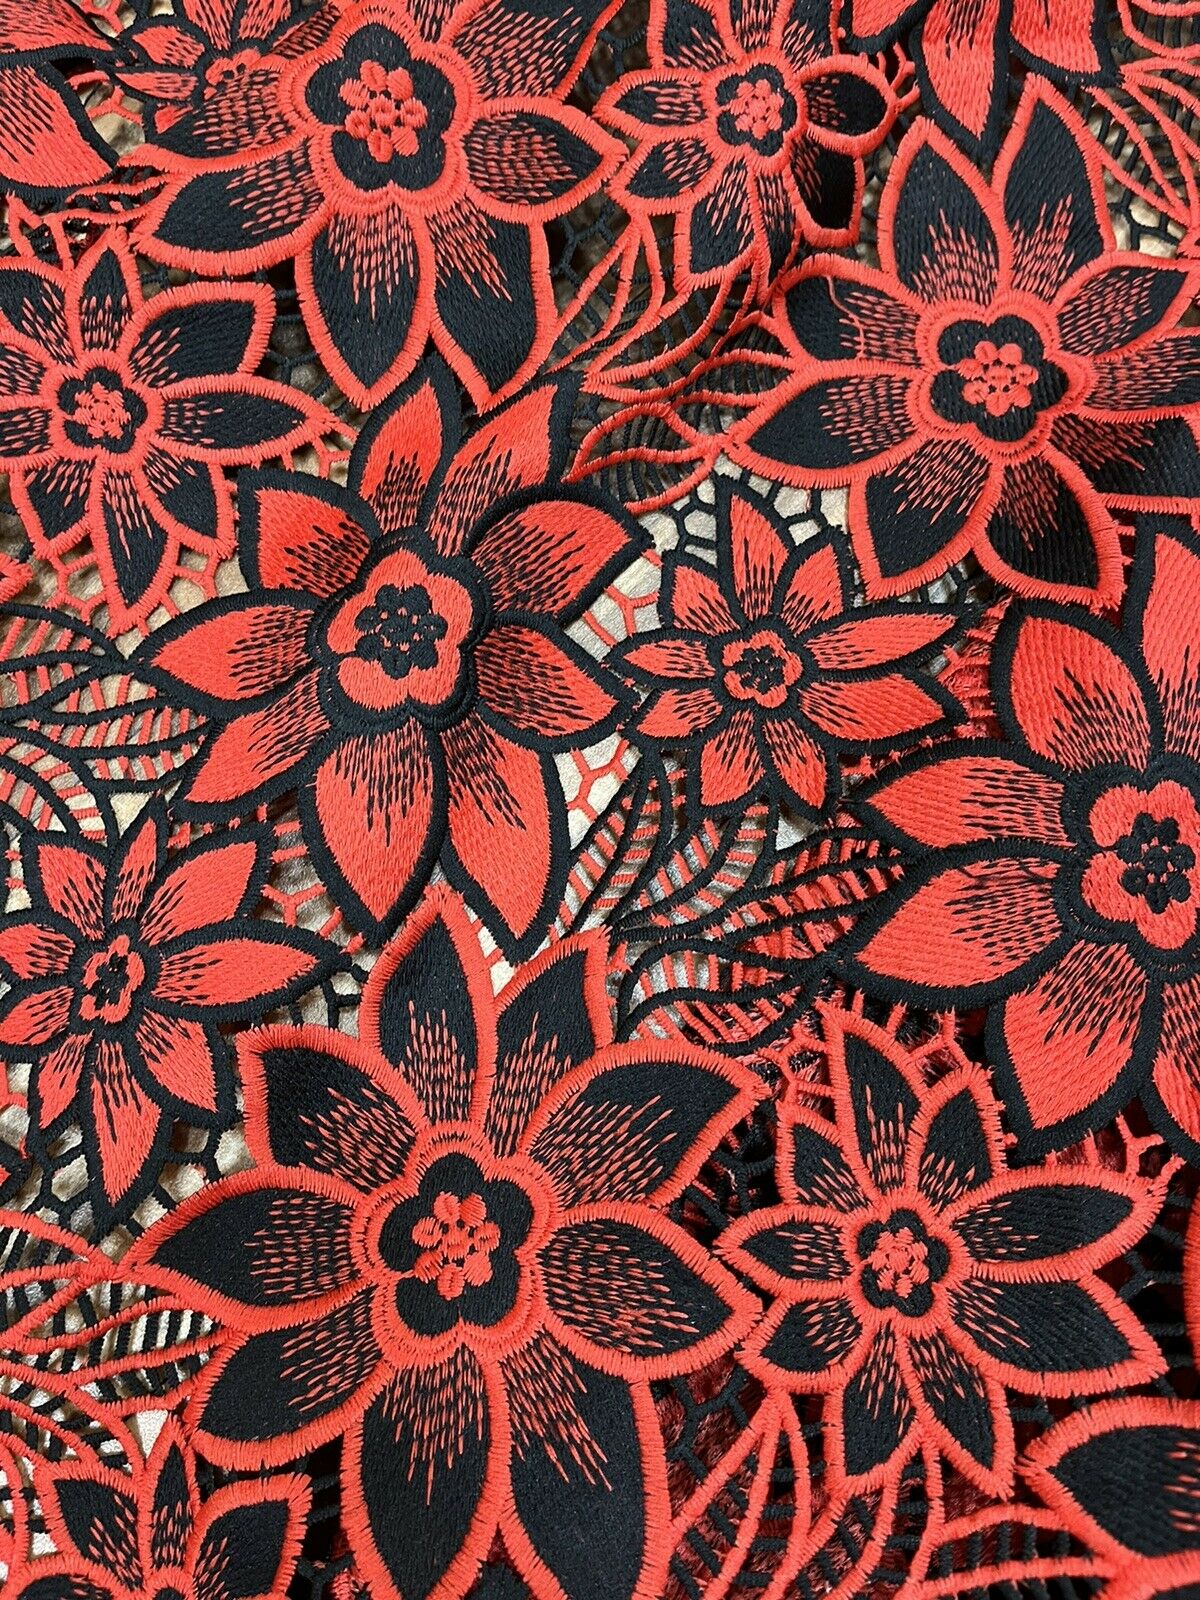 Floral Red and Black Crochet Cotton Lace with Scalloped Edges